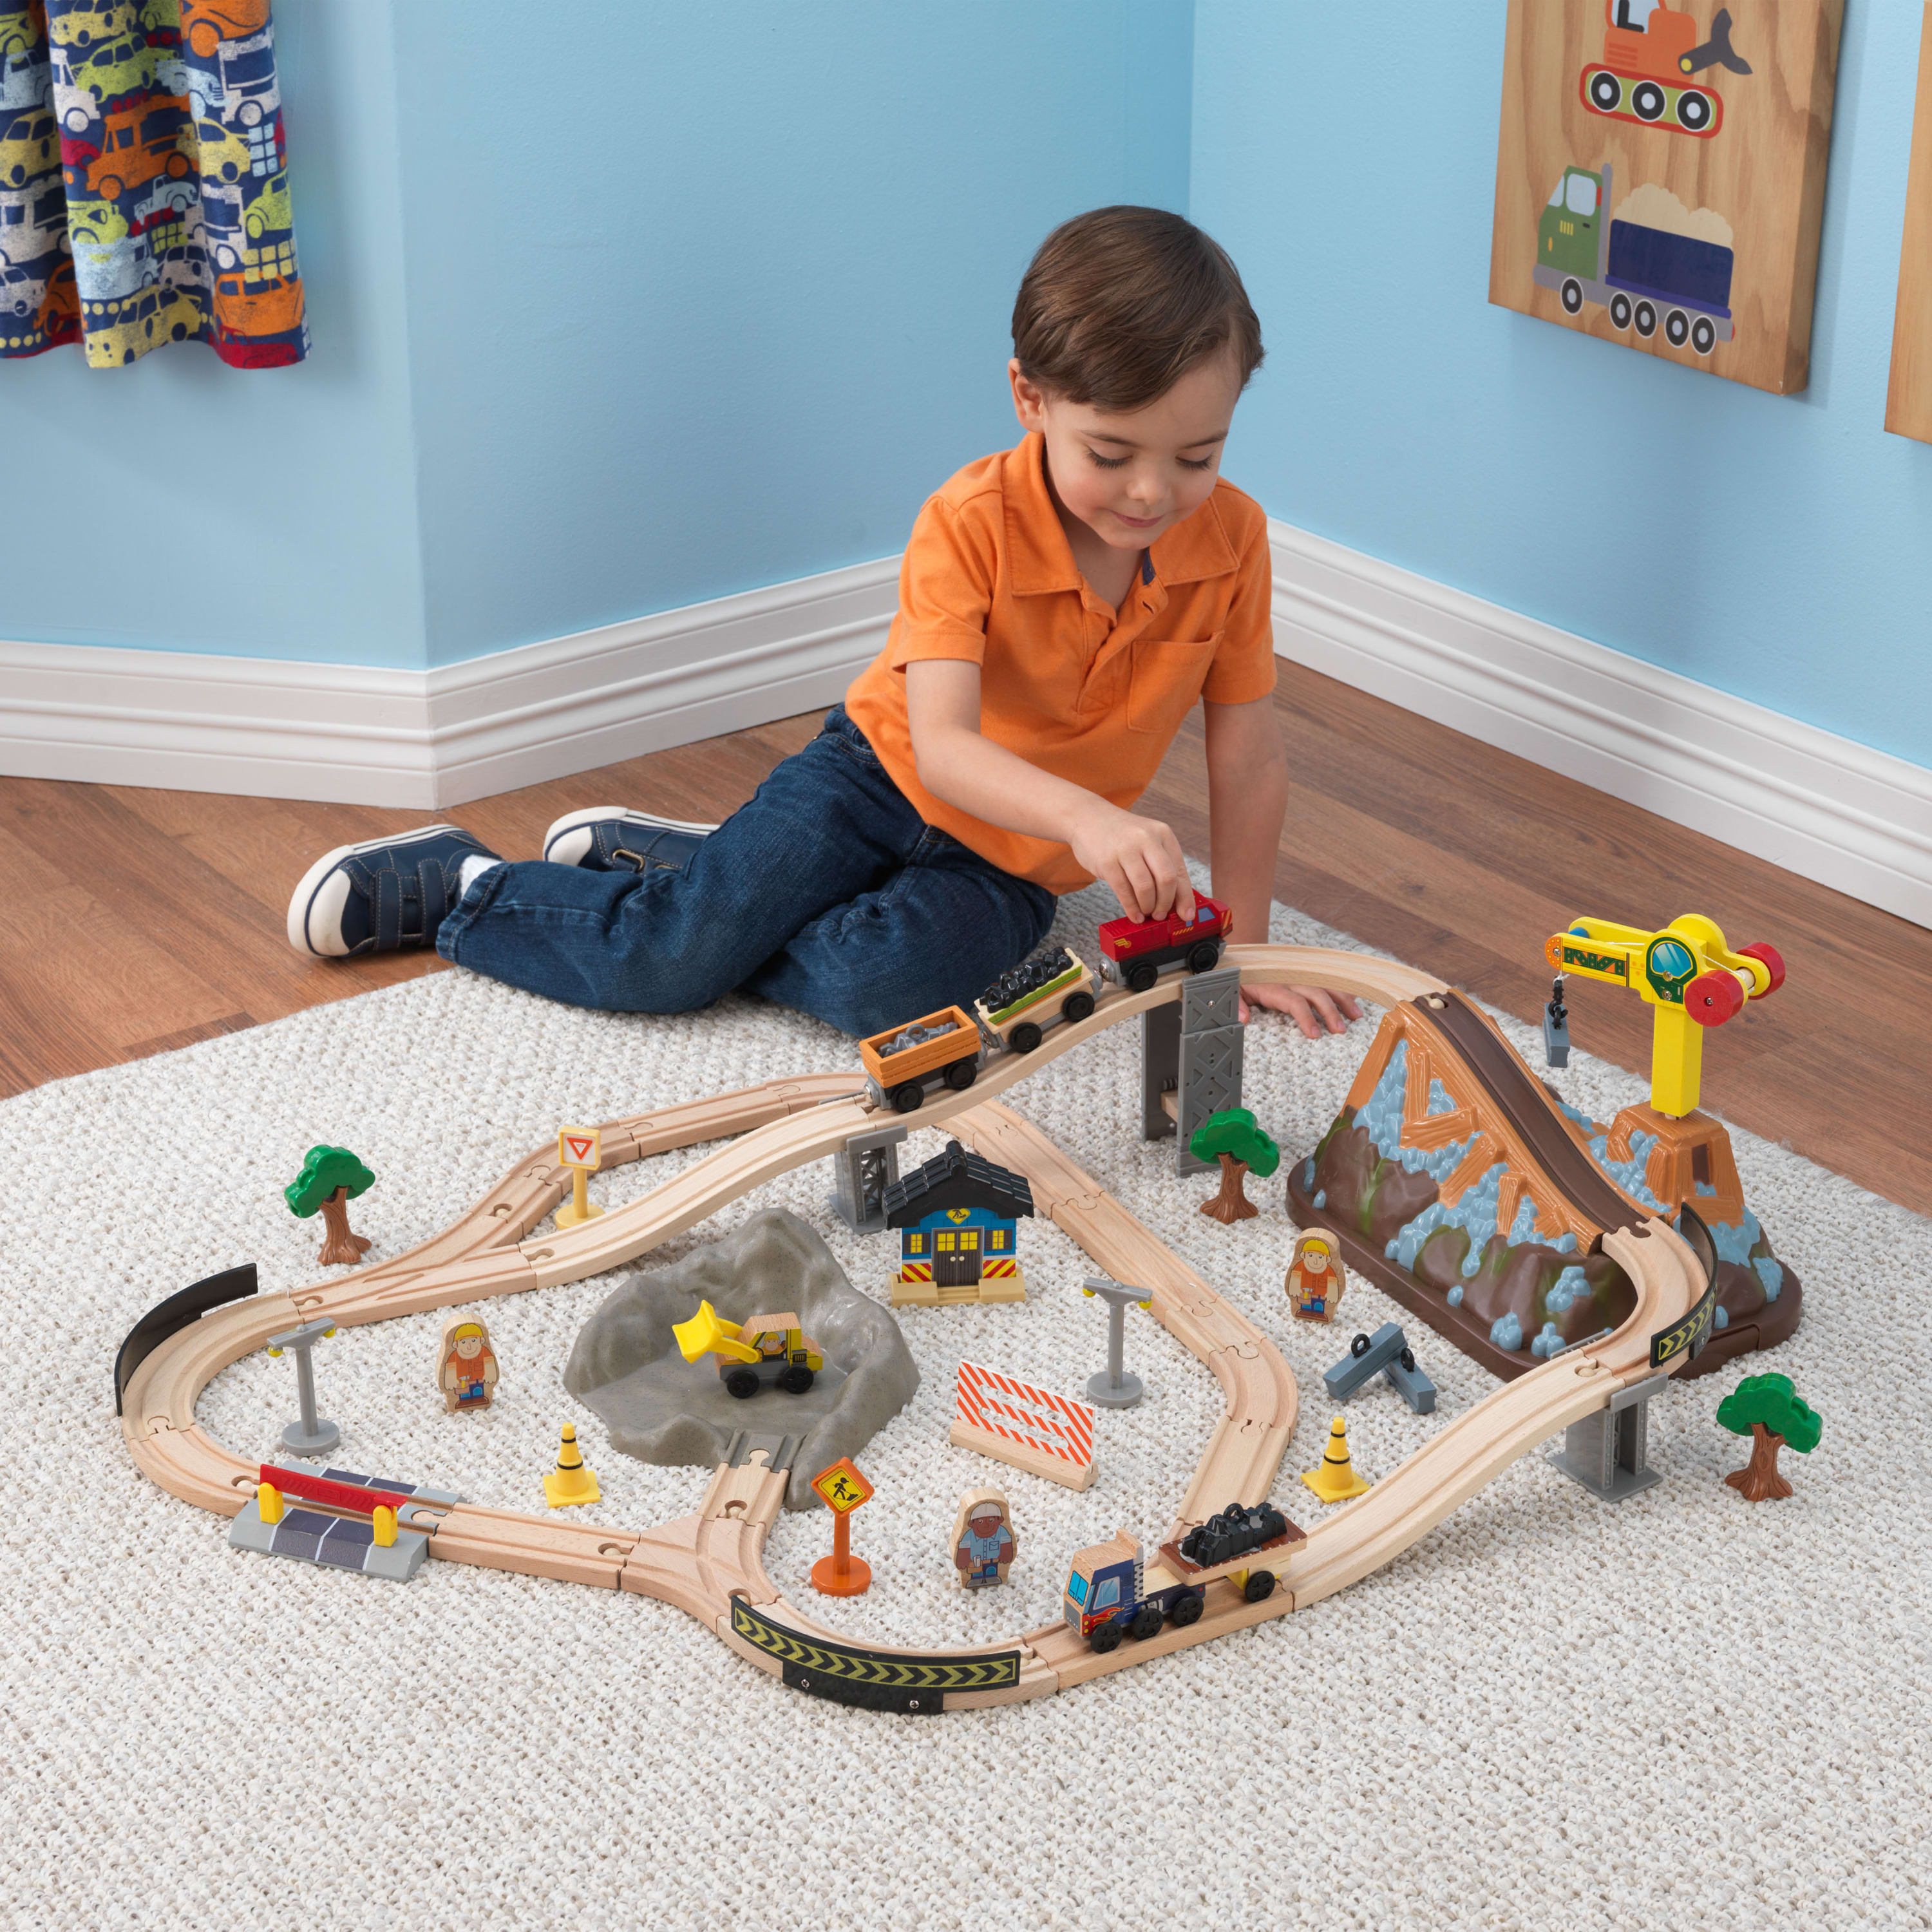 KidKraft Bucket Top Construction Wood Train Set with Crane & 61 Pieces, For Ages 3+ - image 2 of 7